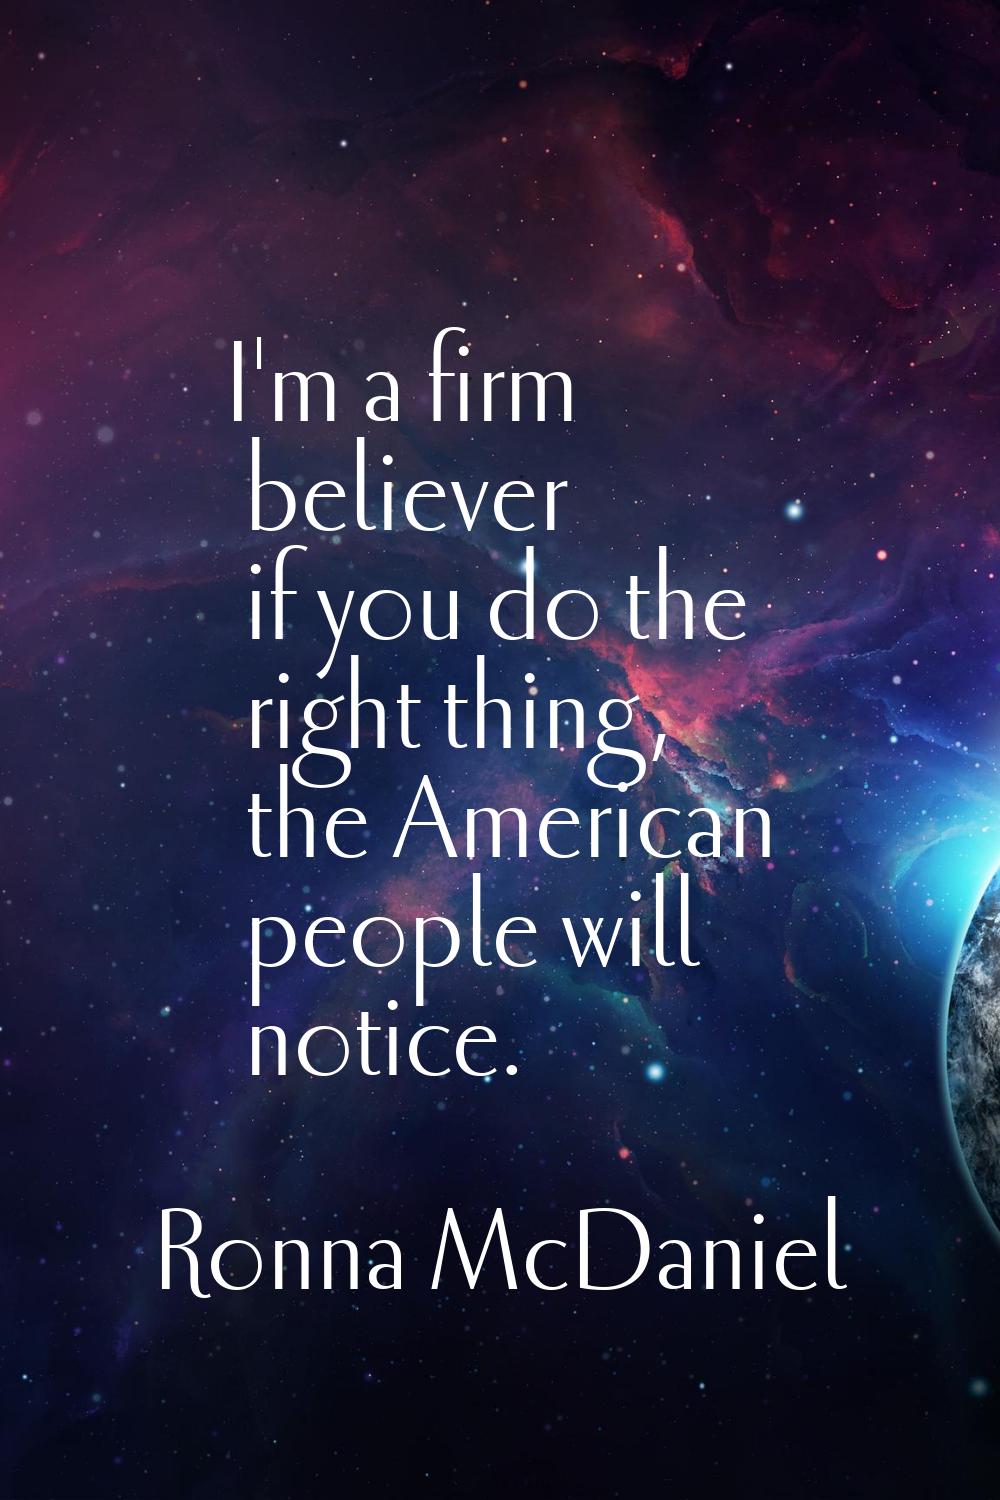 I'm a firm believer if you do the right thing, the American people will notice.